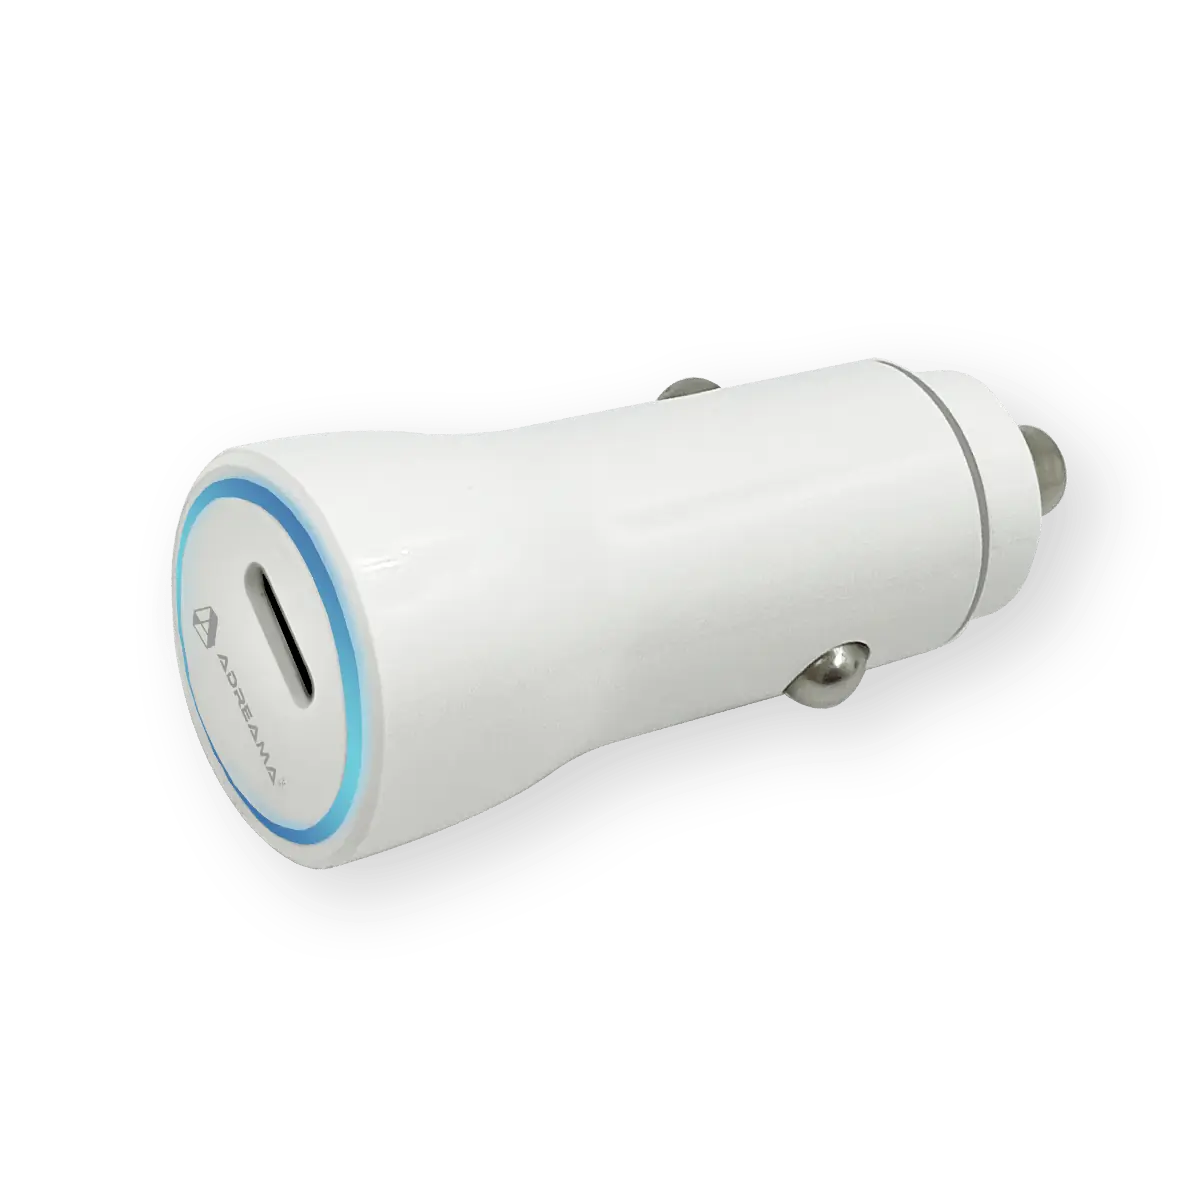 Power Up Your Devices with Adreama's PD 20W Car Charger